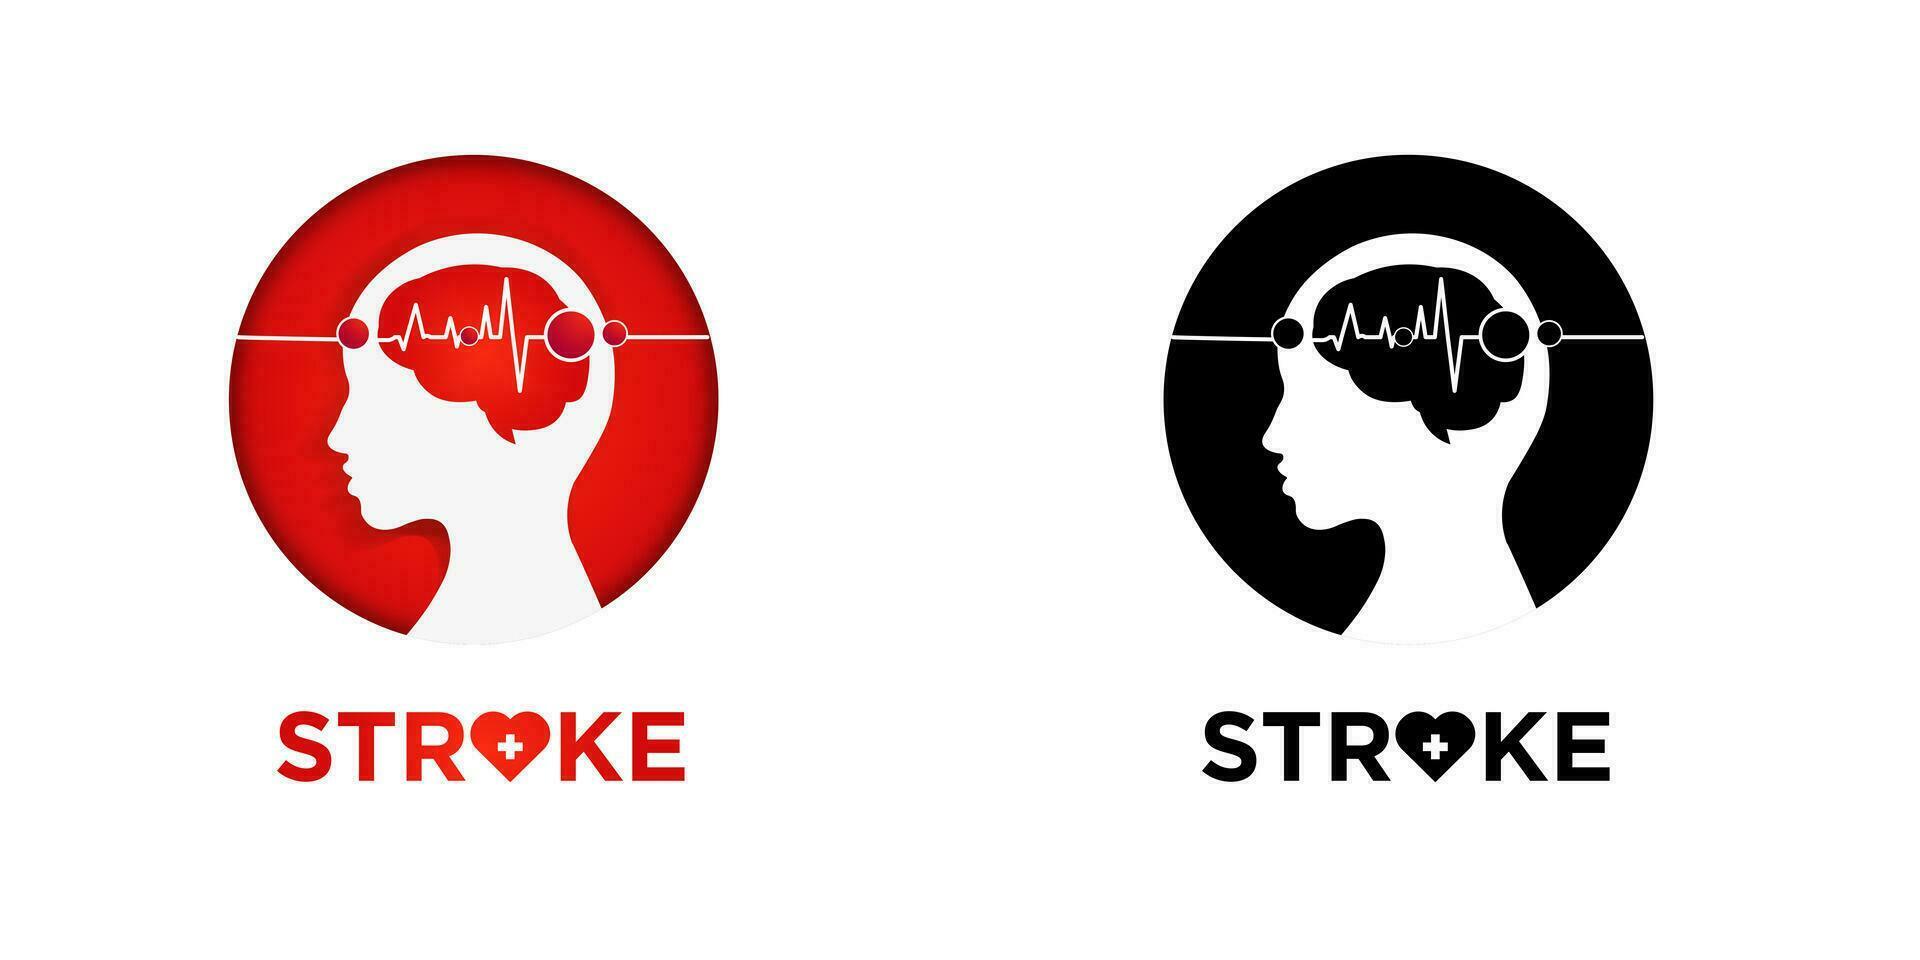 Stroke Icon. Illustration of poor blood flow to the brain causing a stroke, human profile inside a round frame and heart beat line. Vector Illustration. EPS 10.